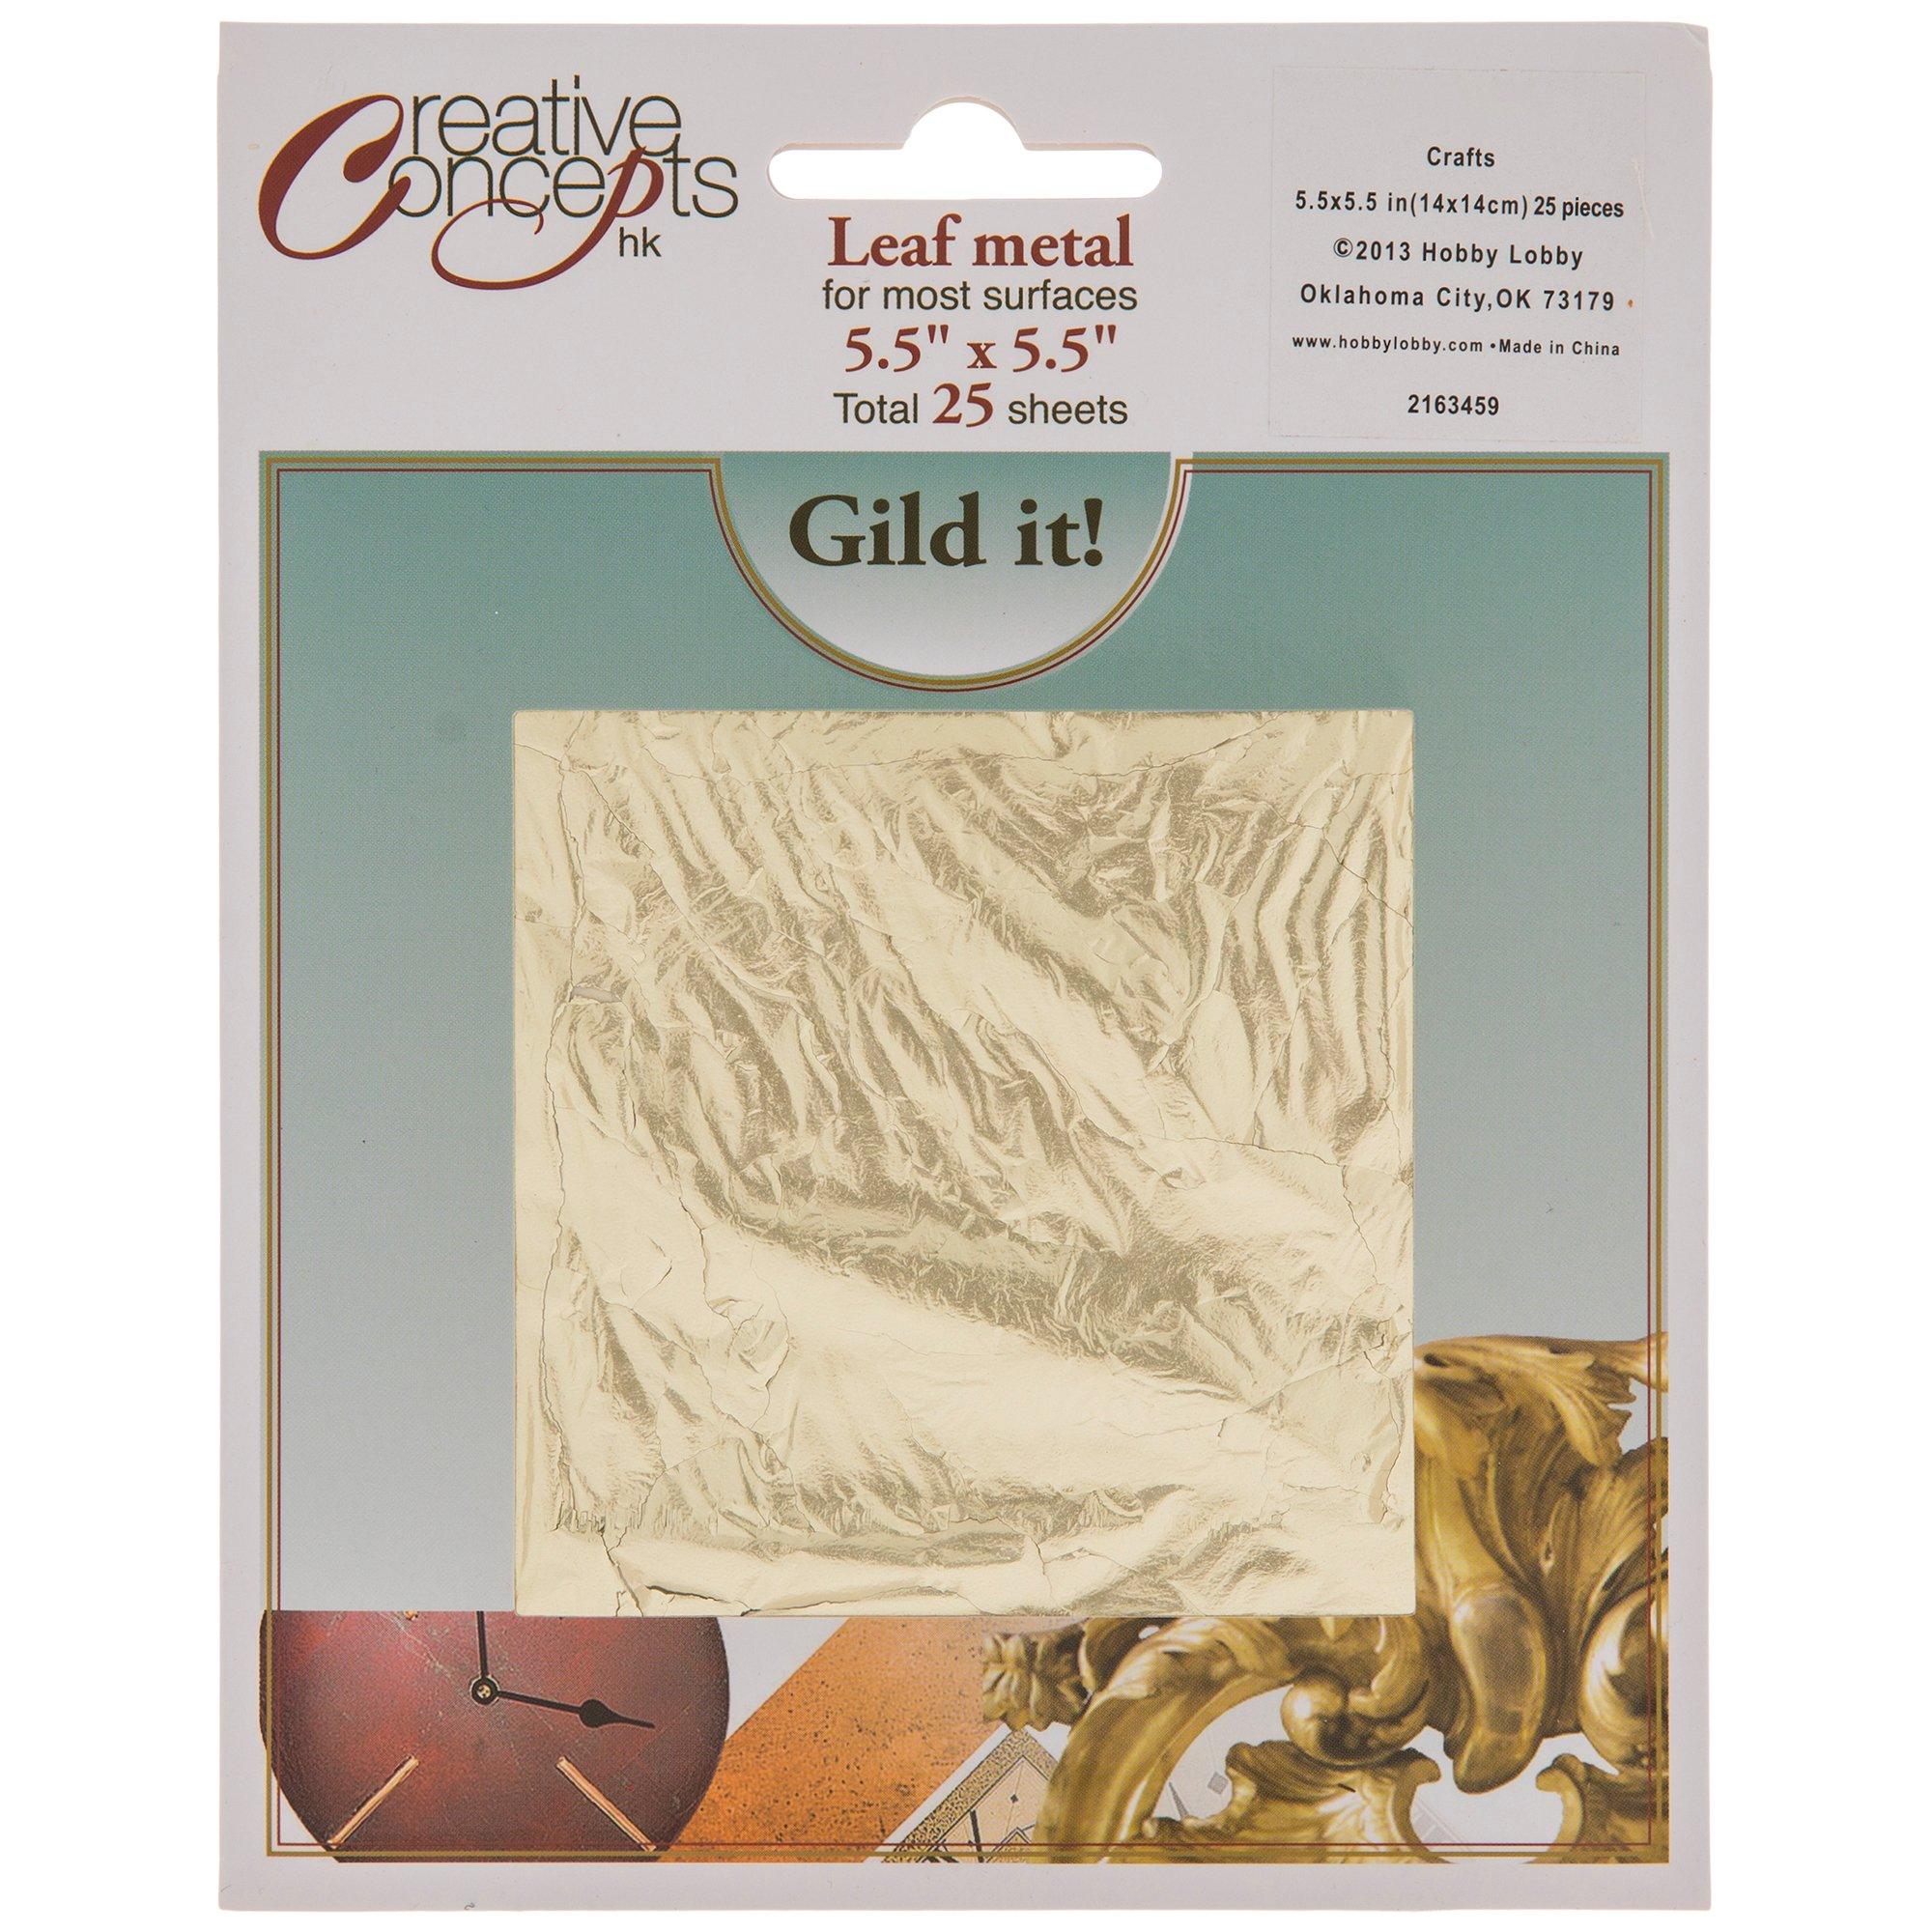 6 Packs: 25 ct. (150 total) Premium Silver Leaf Sheets by Craft